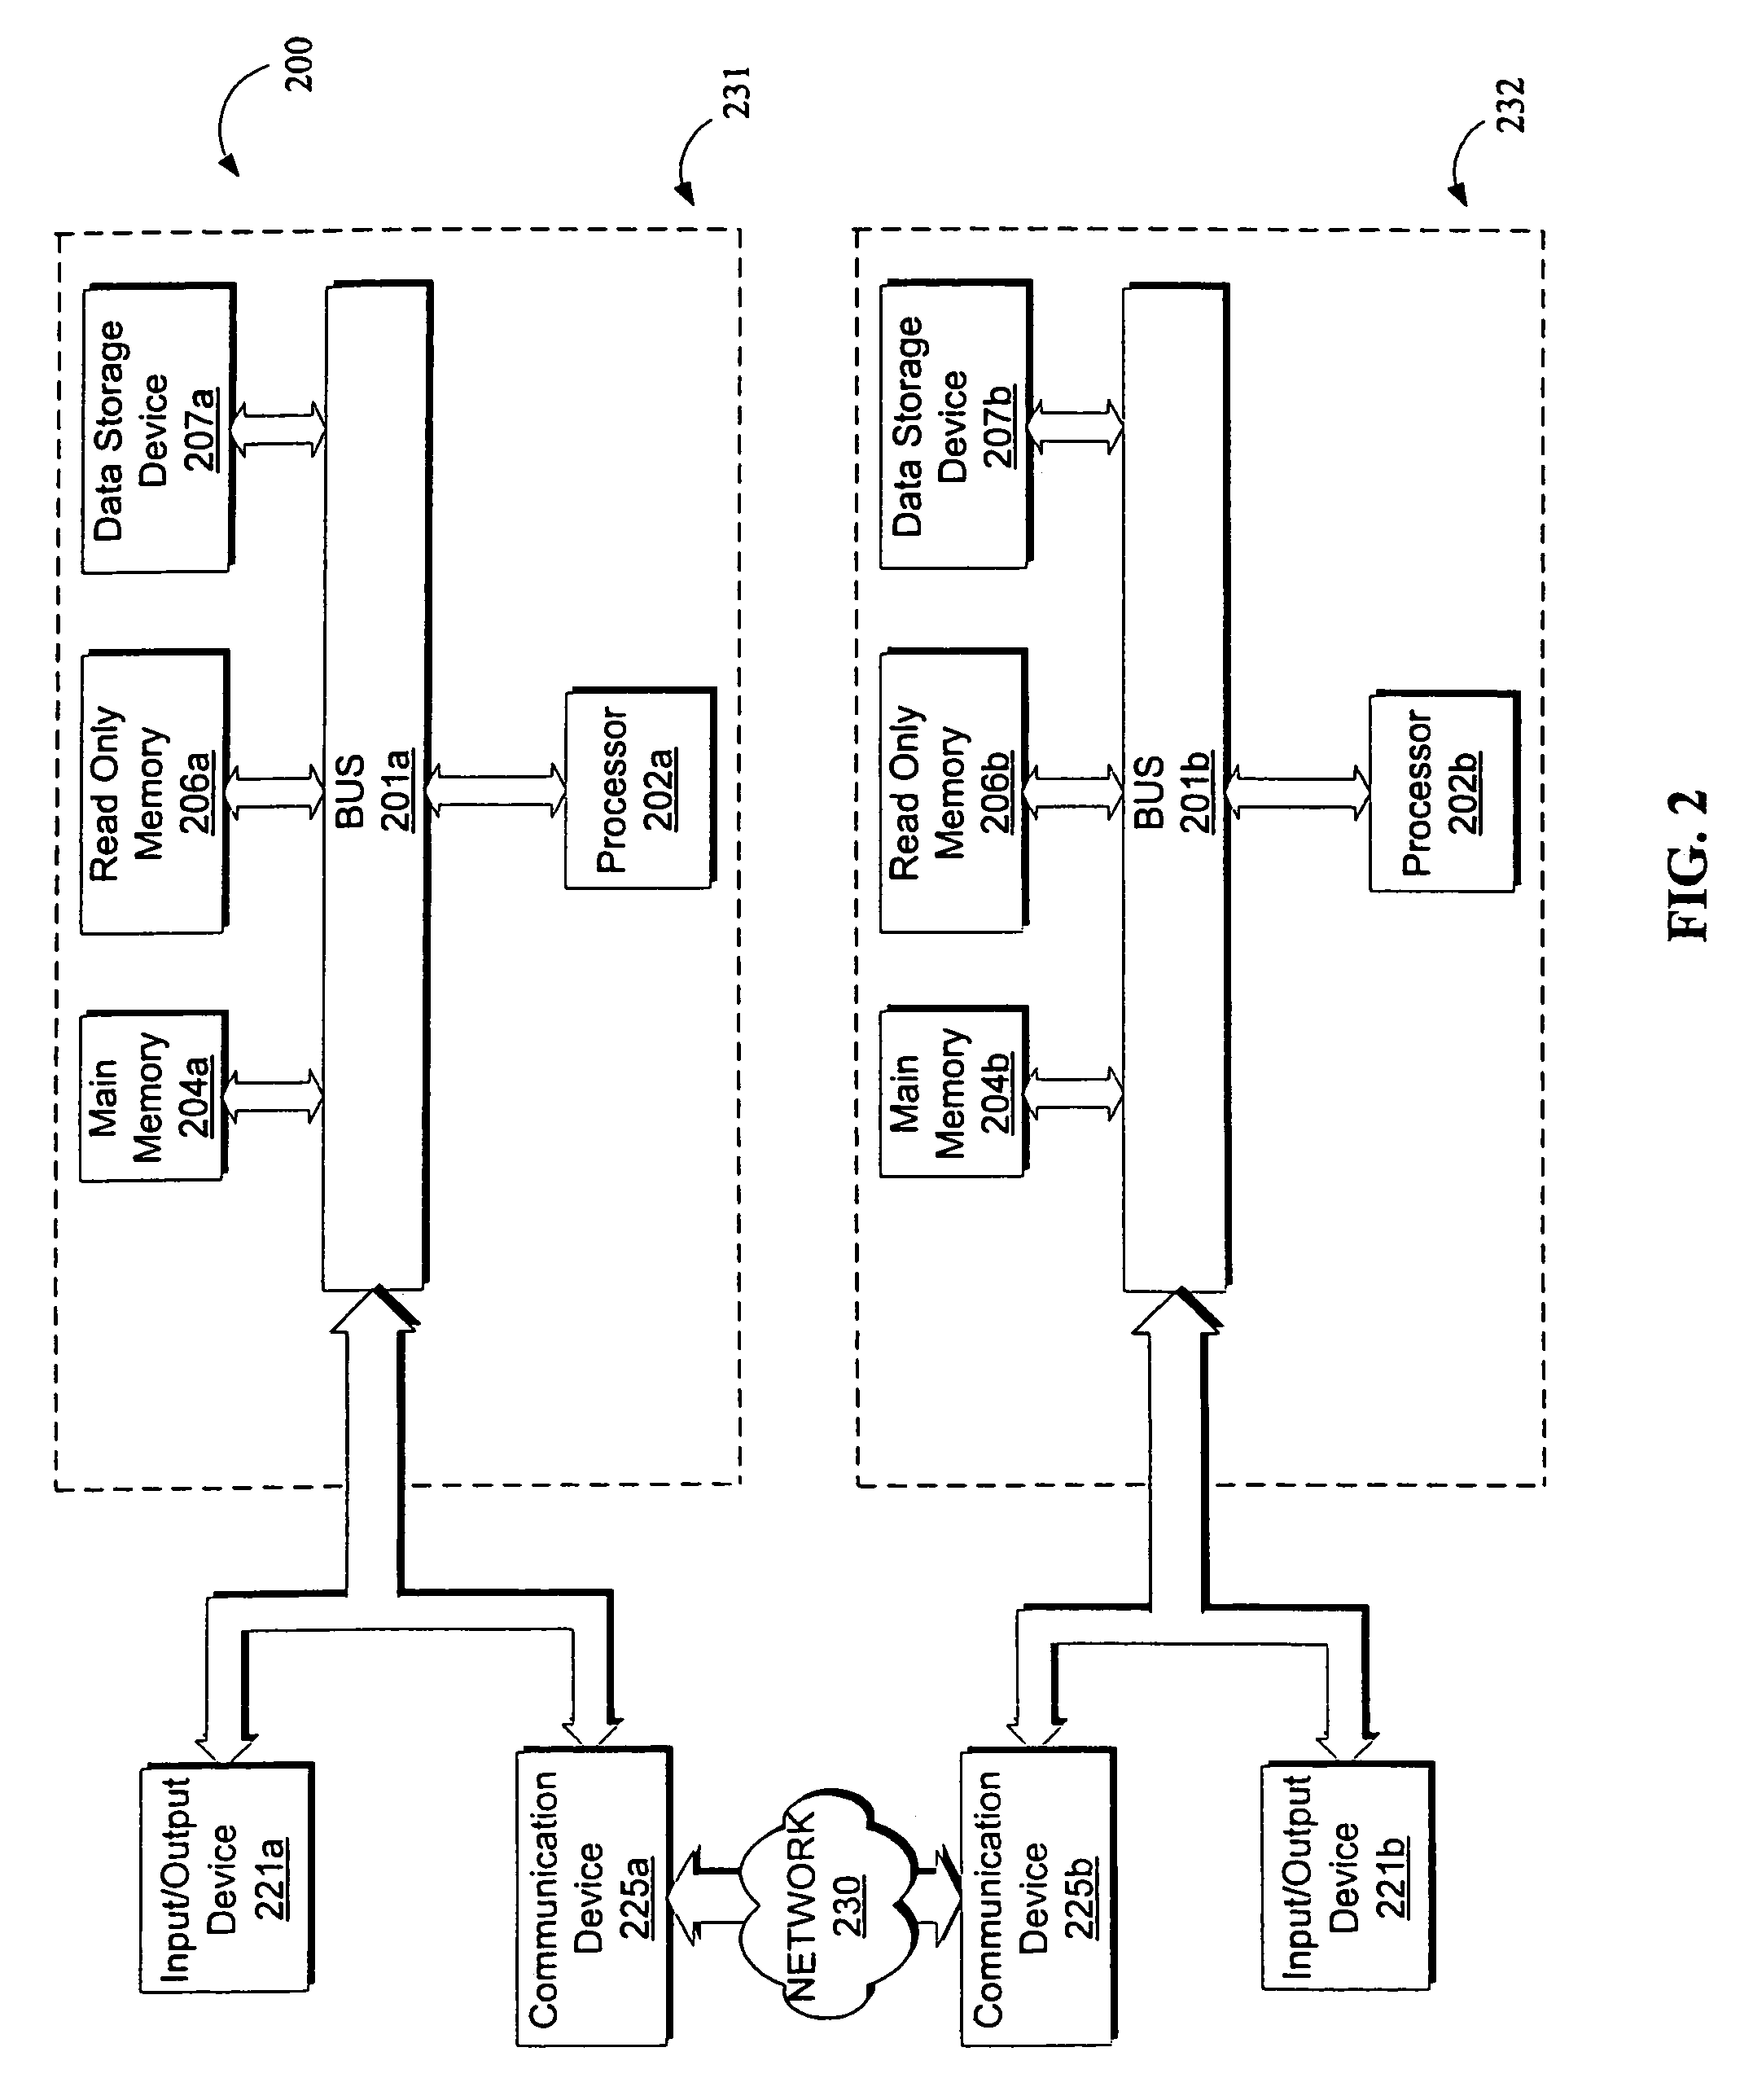 Secure authentication systems and methods